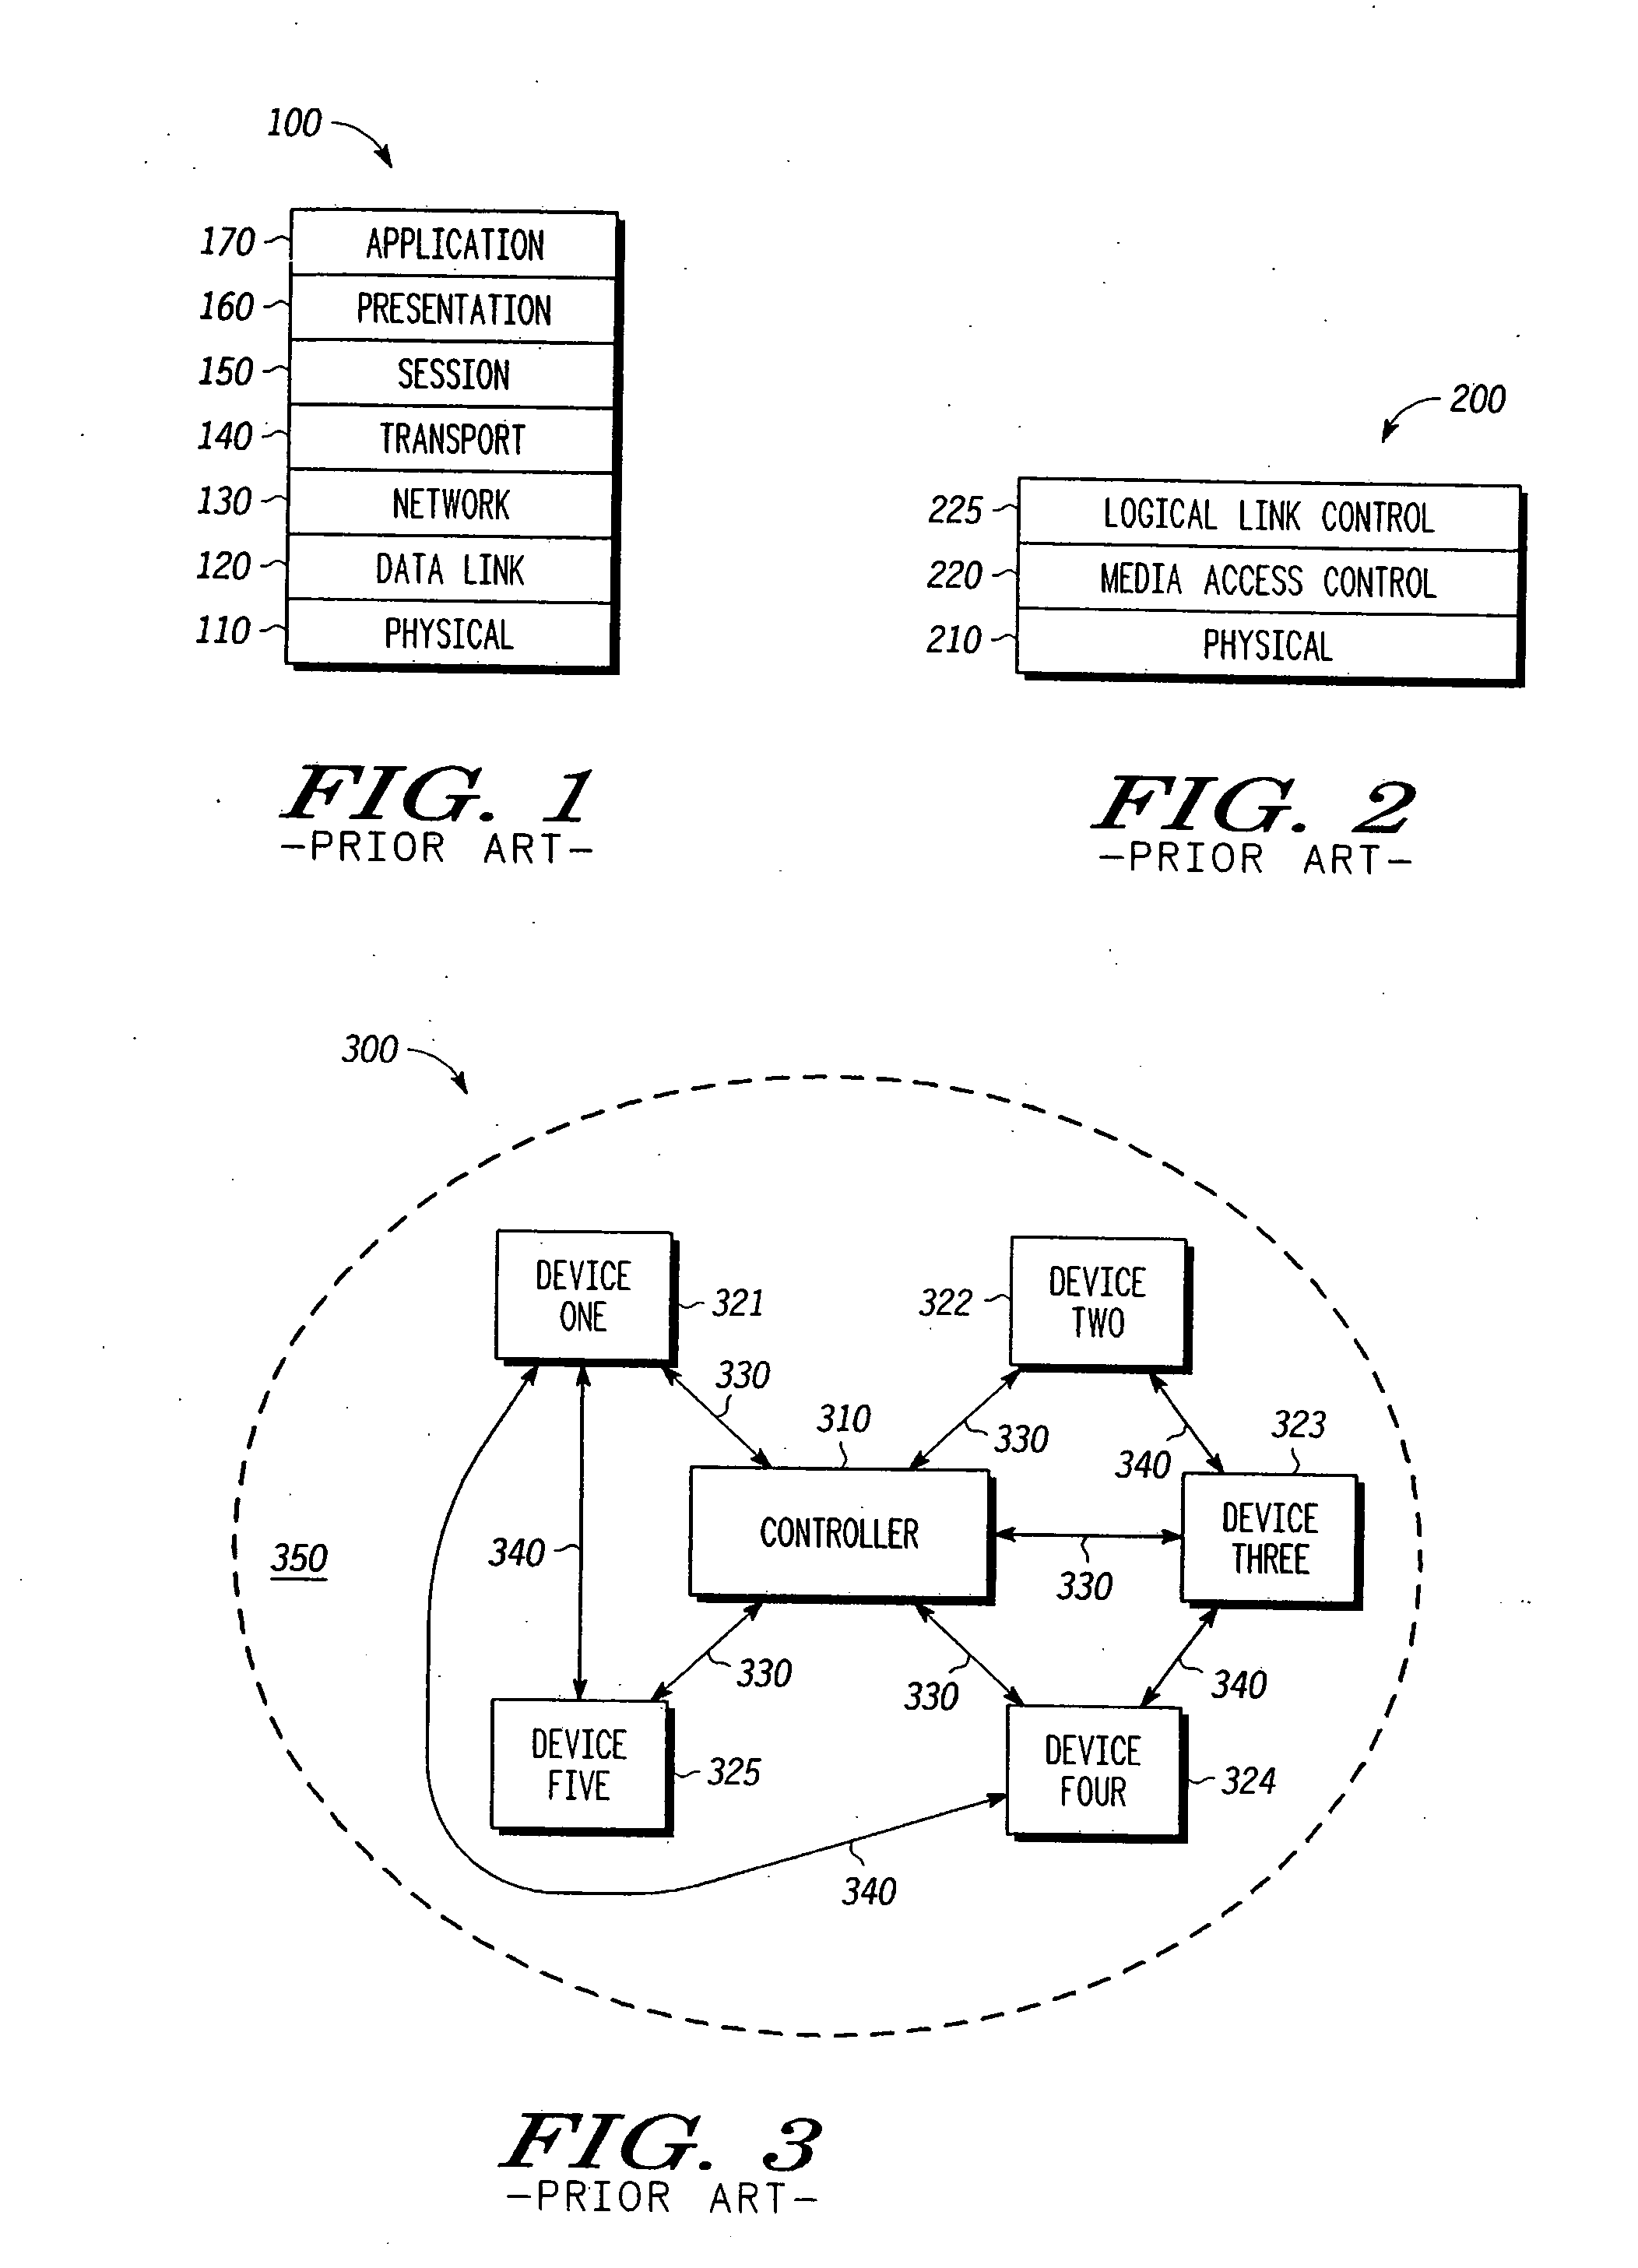 Method for controlling operation of a child or neighbor network